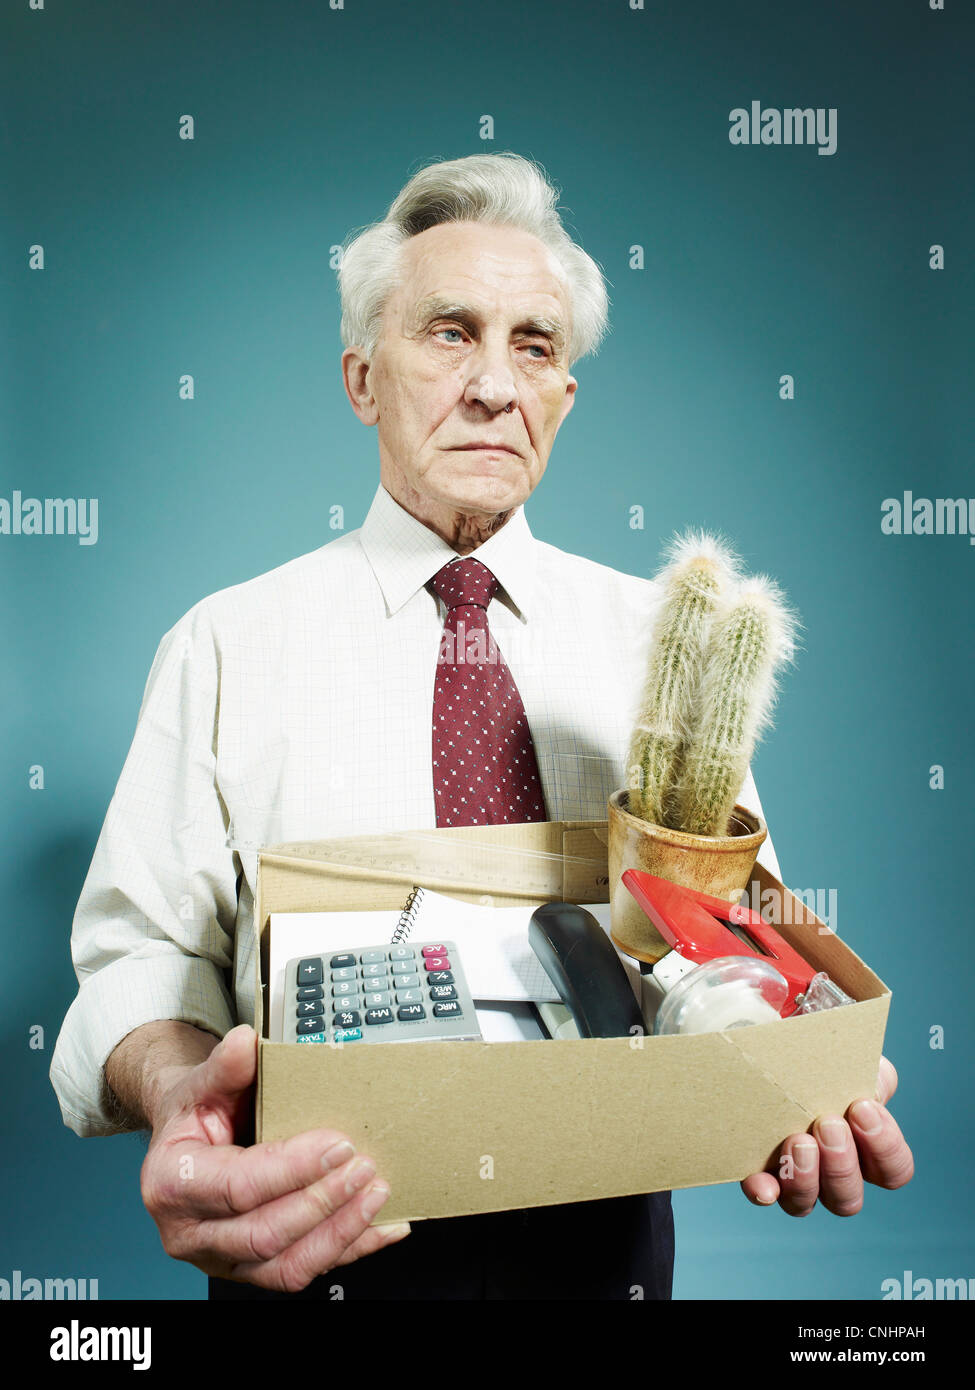 A senior man carrying a box of possessions after being fired Stock Photo